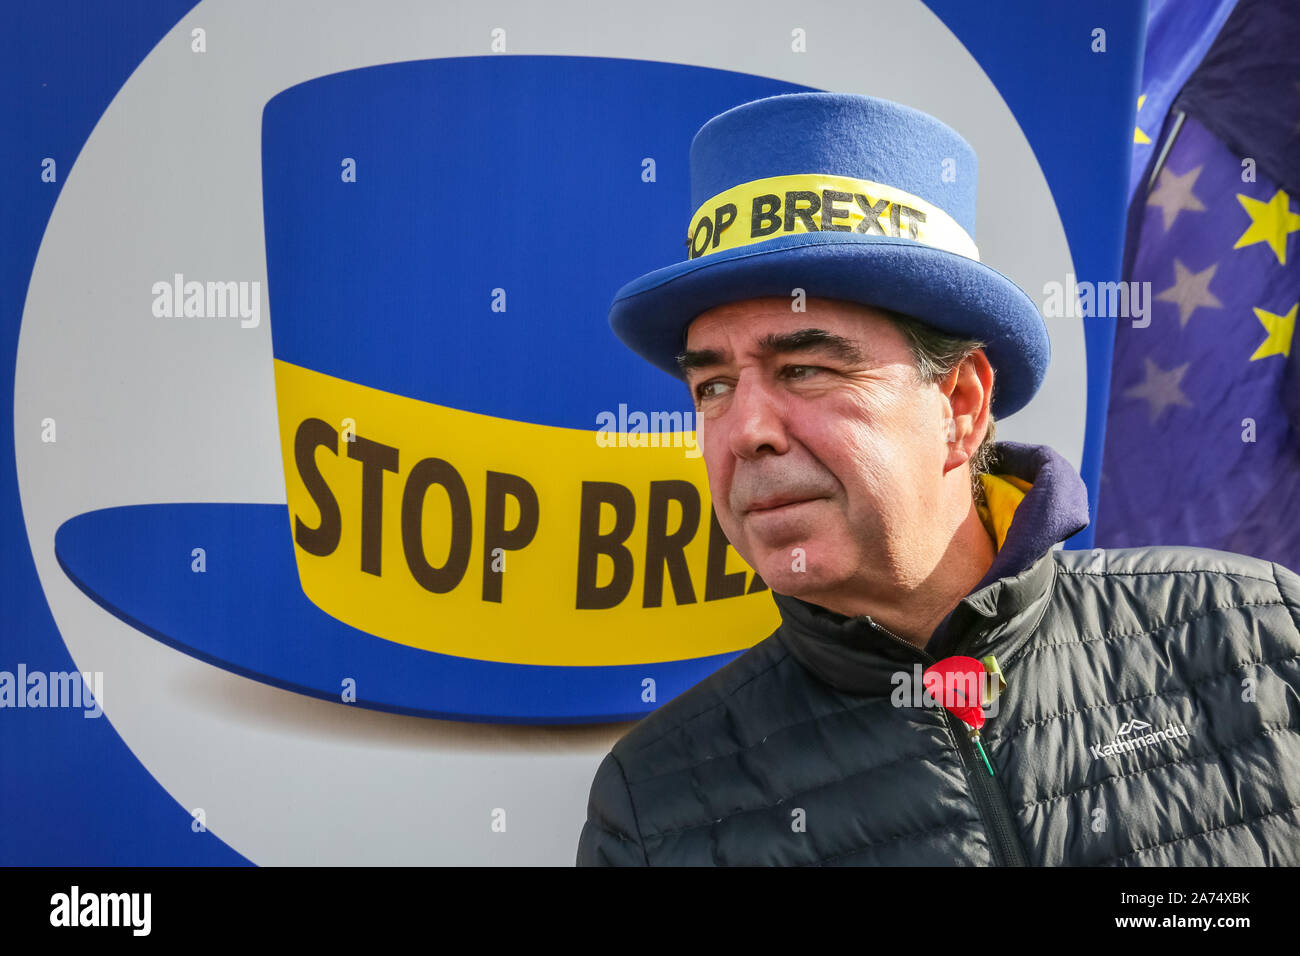 Westminster, London, UK, 30th Oct 2019. Westminster 'Stop Brexit Man' Steven Bray at the protest. Pro-and anti-Brexit protesters continue to rally outside Parliament in Westminster as MPs inside attend Prime Minister's Questions. Credit: Imageplotter/Alamy Live News Stock Photo